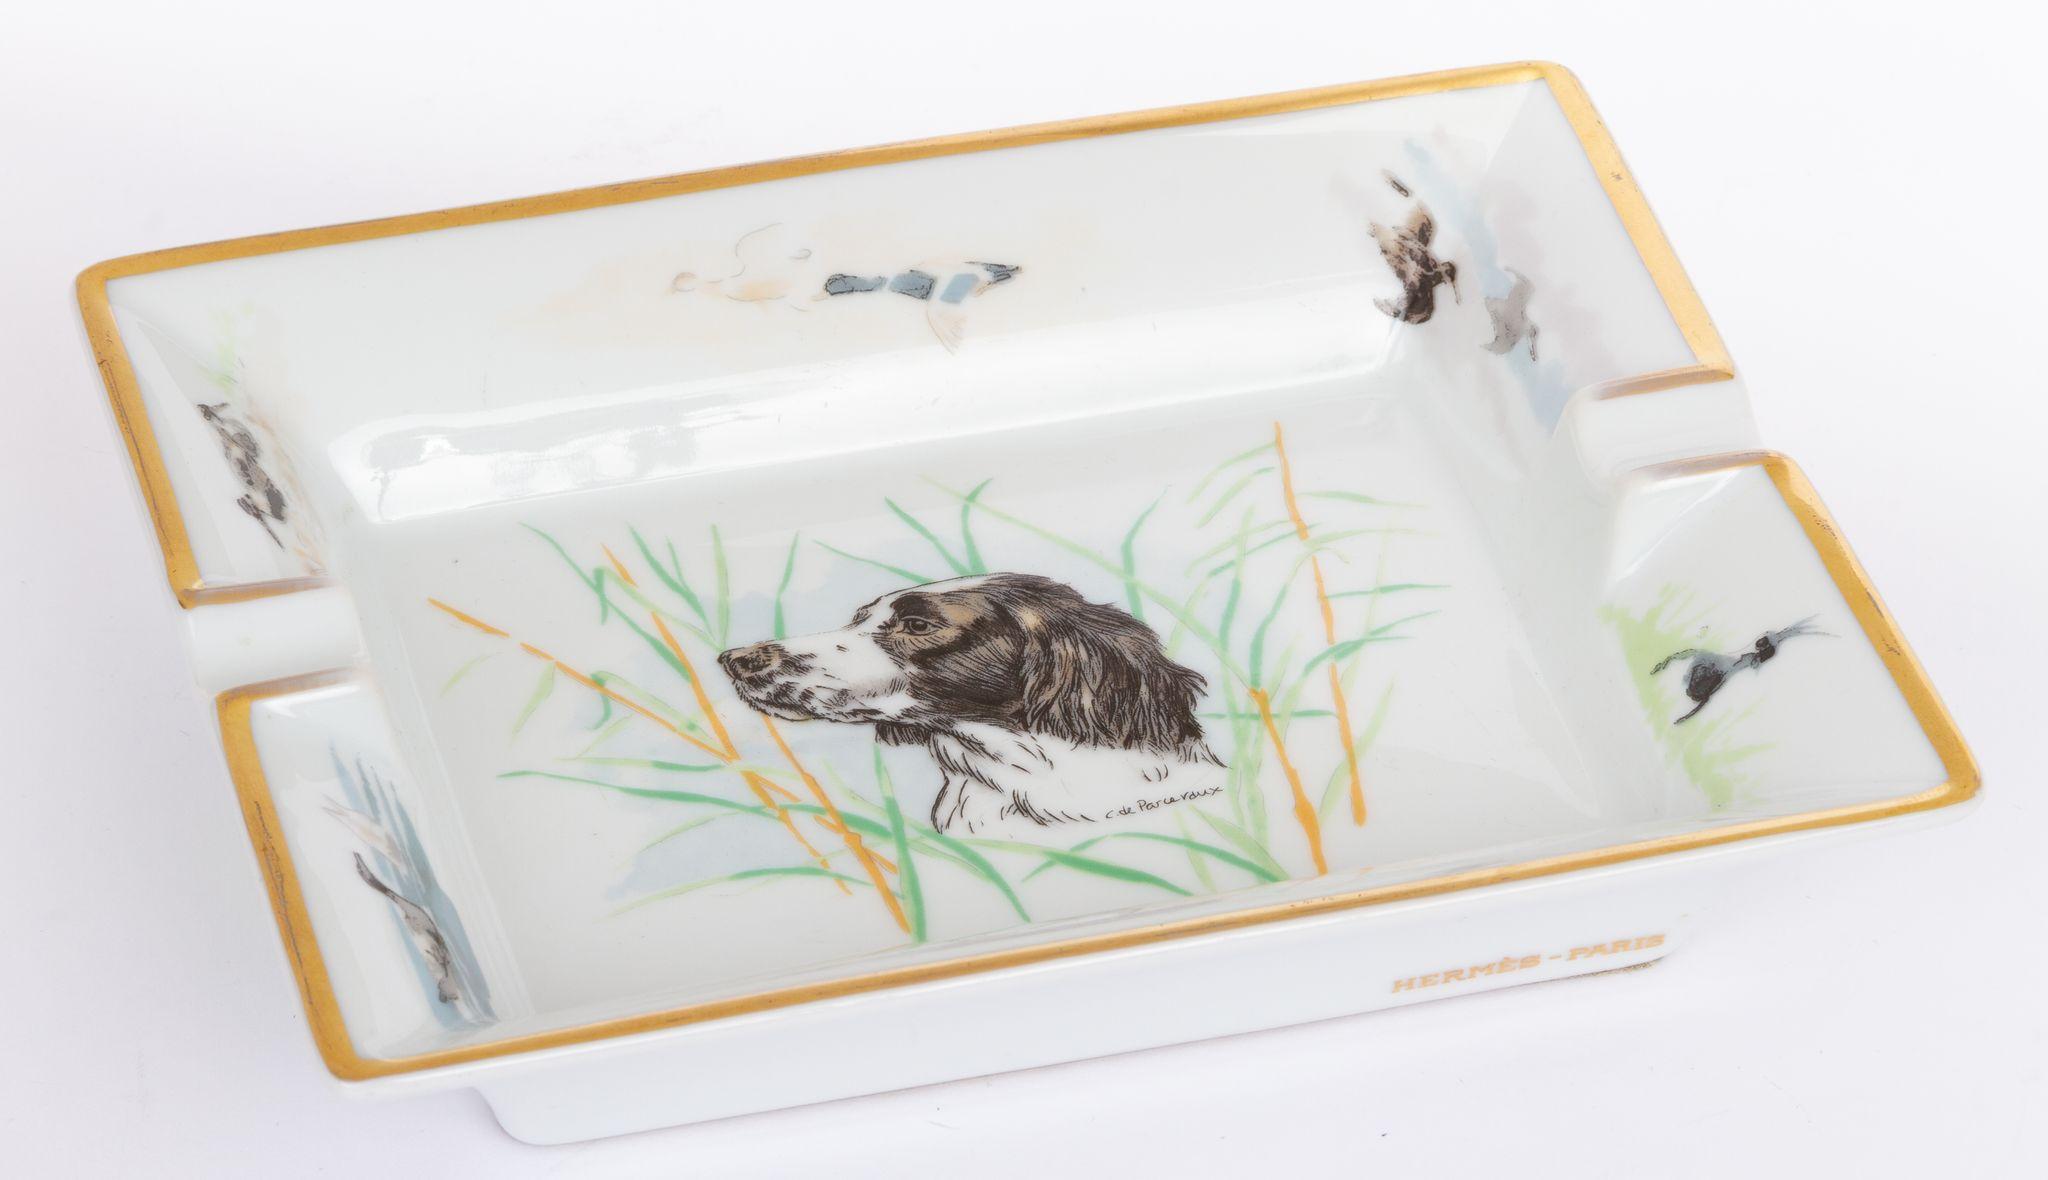 Hermès vintage ashtray with the image of a head of an English Setter in the center. On the outside the piece is framed with gold. The ashtray is in excellent condition and comes with the original box.